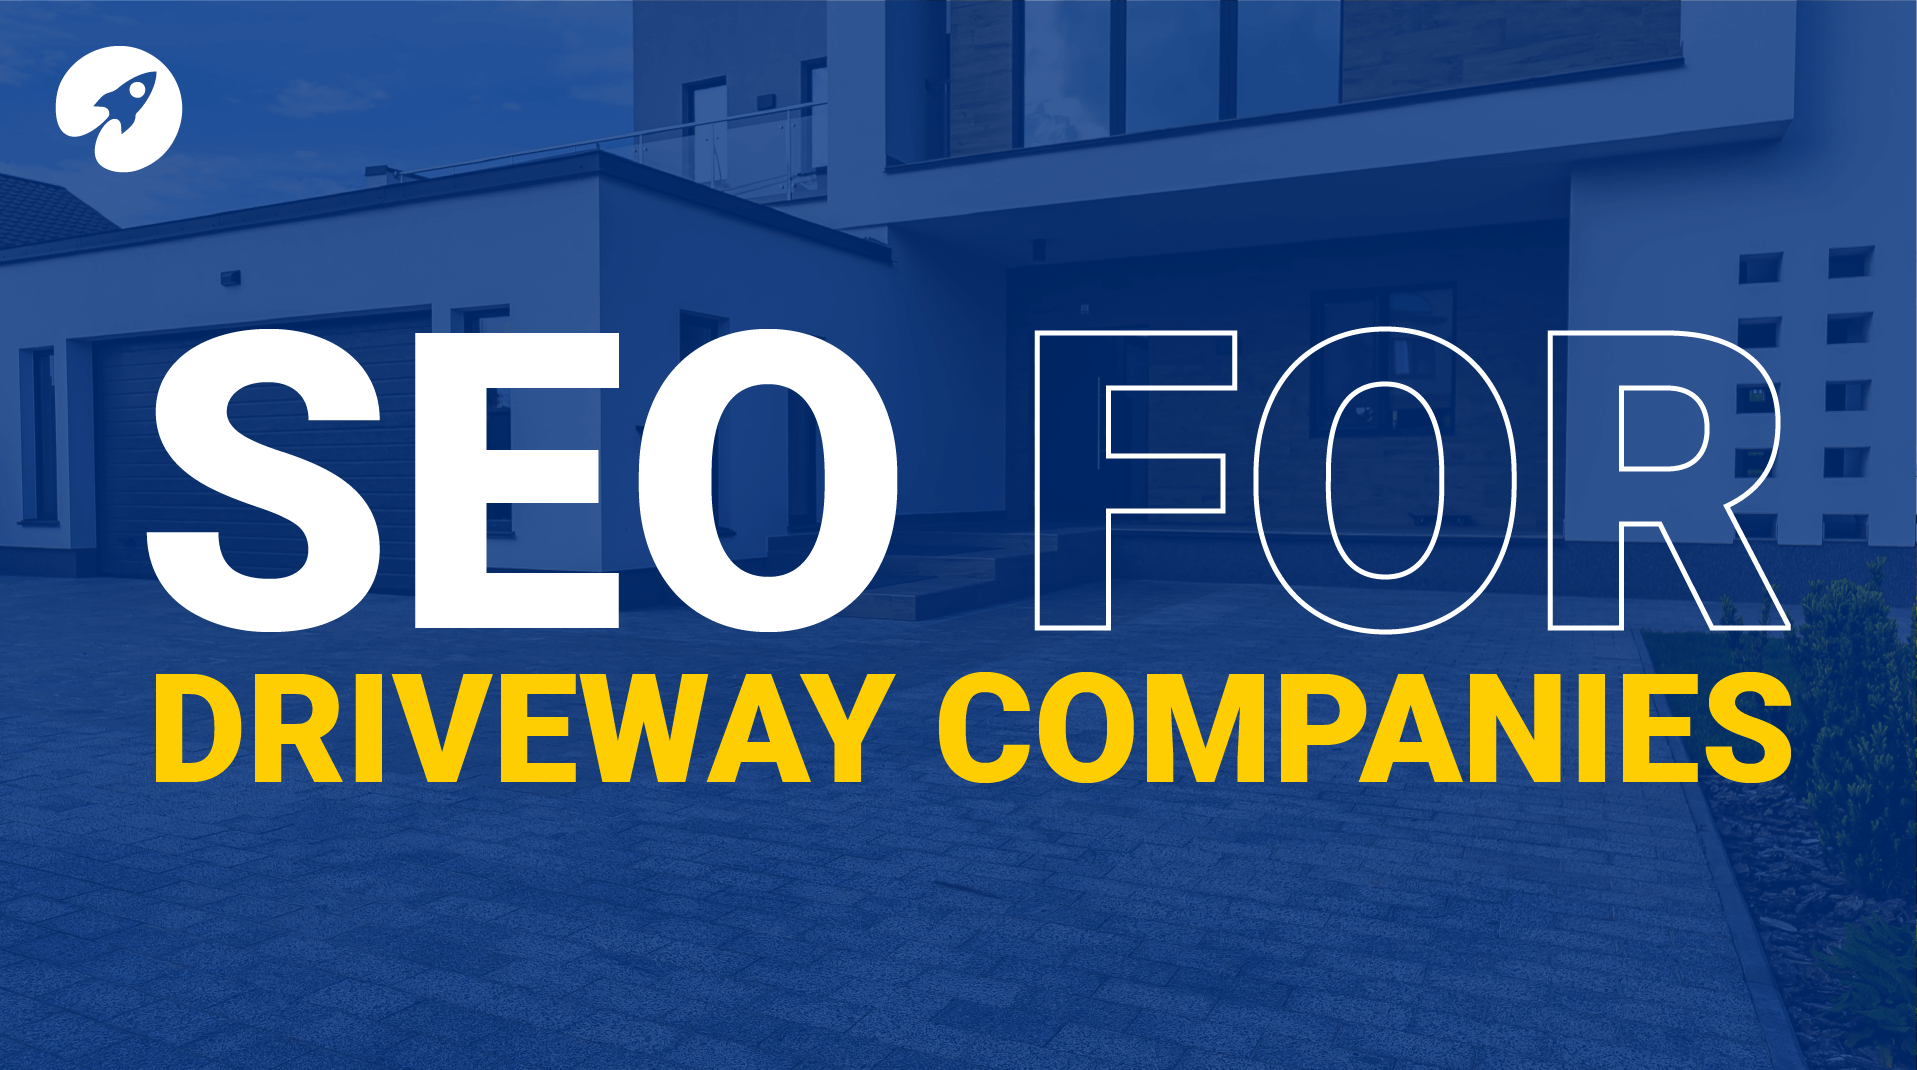 10 SEO tips for driveway companies